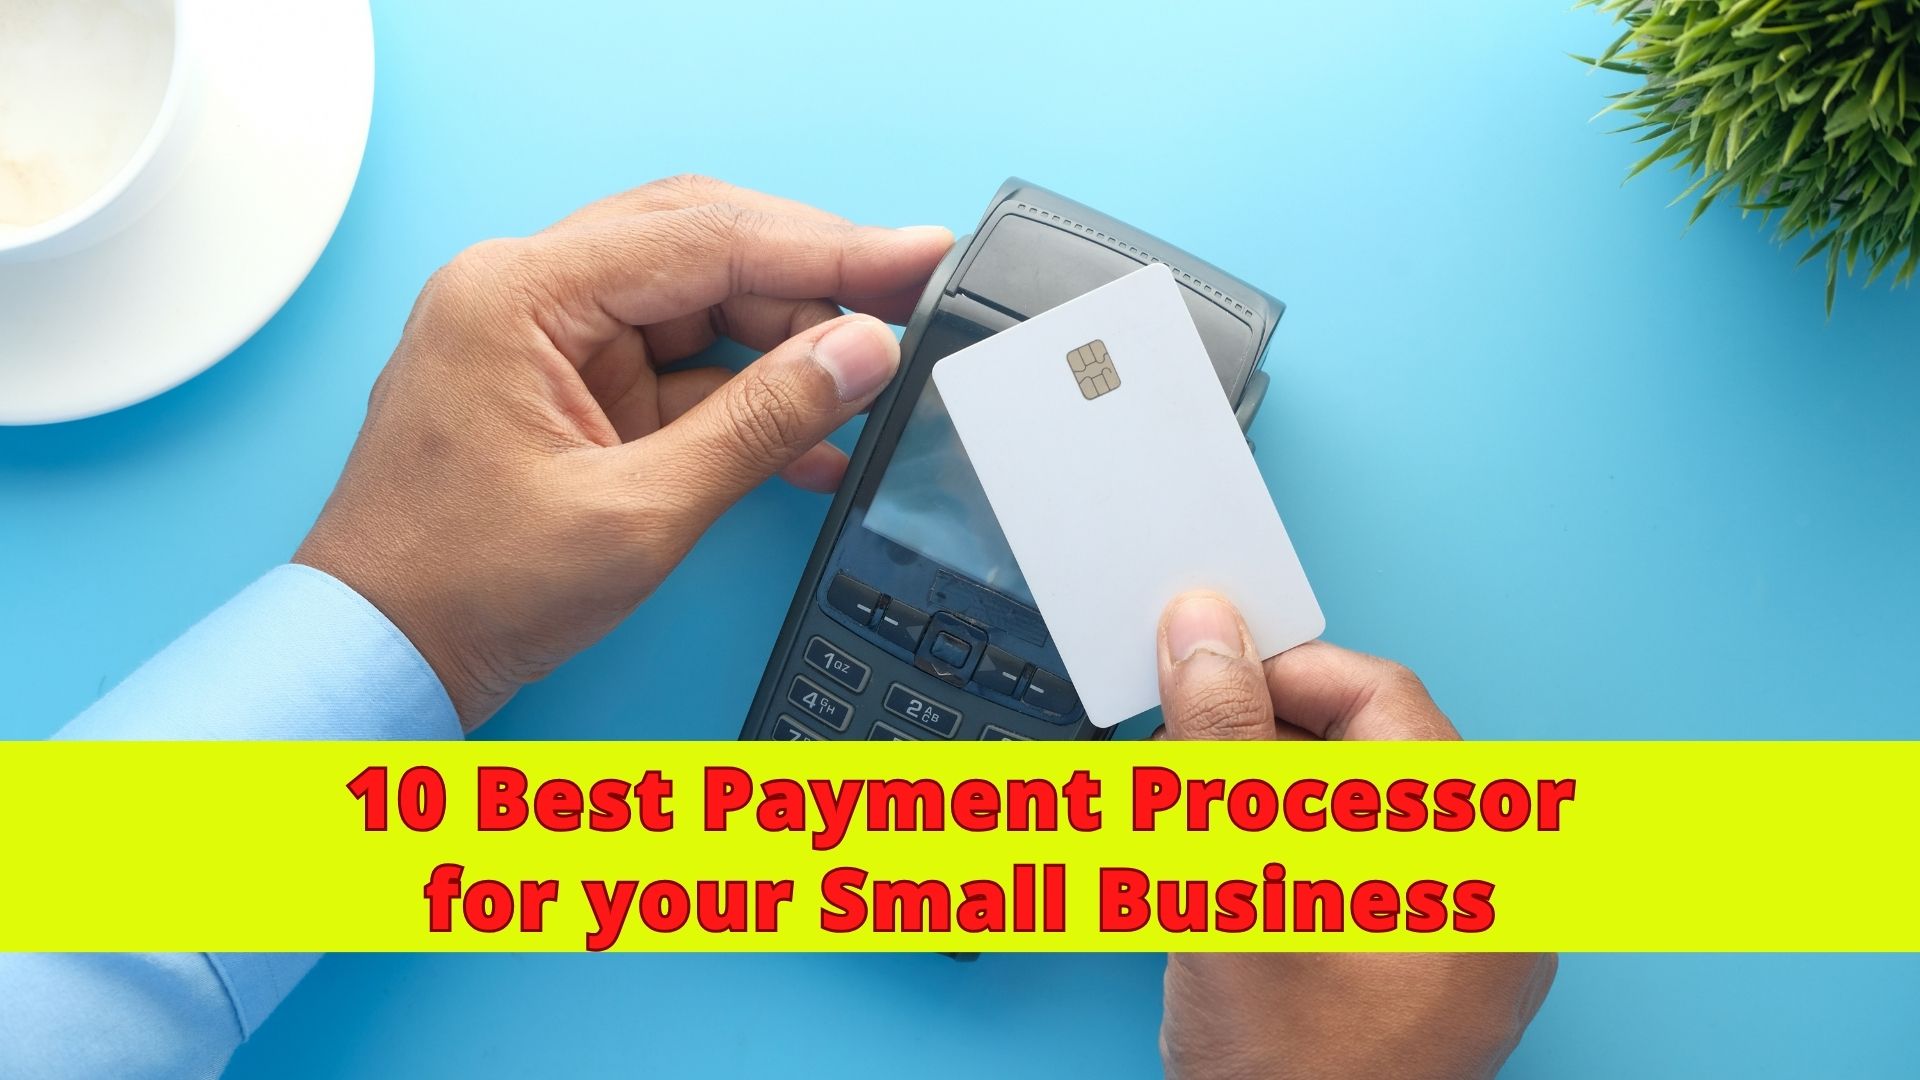 10 Best Payment Processor for Small Business